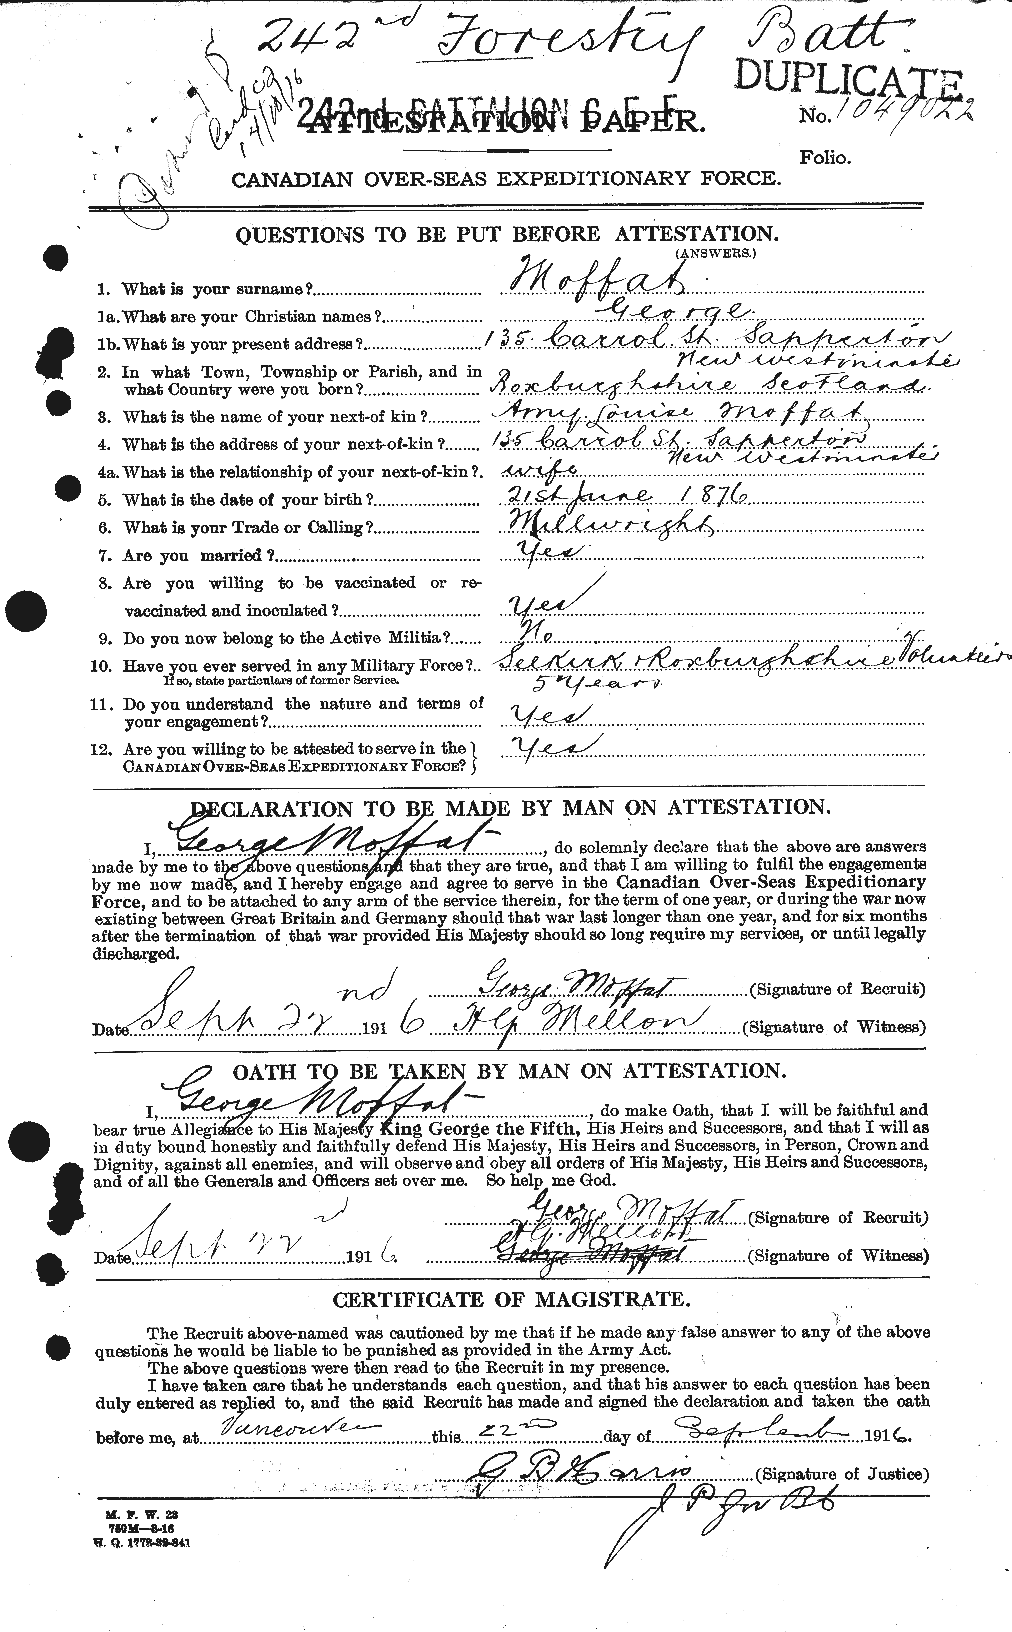 Personnel Records of the First World War - CEF 499013a